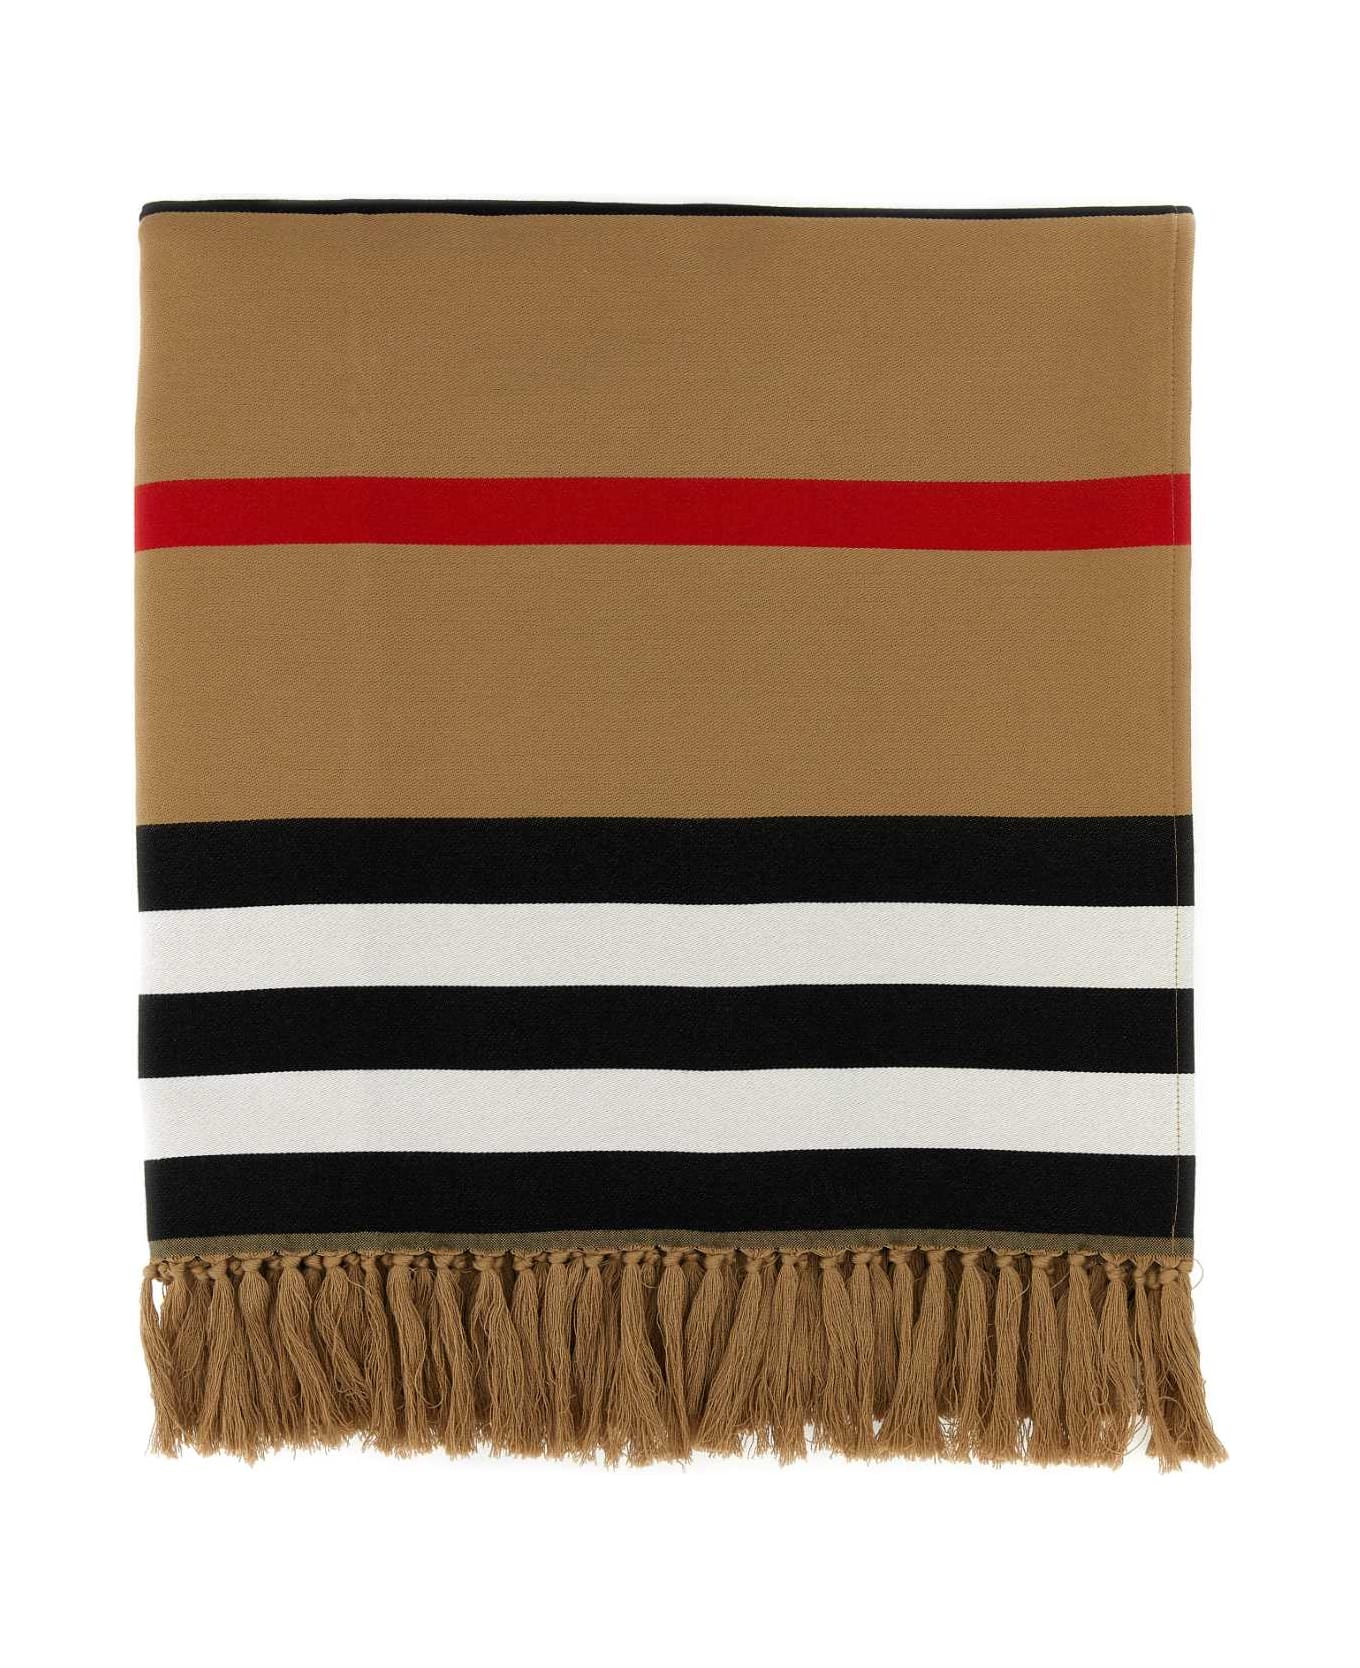 Burberry Embroidered Cotton Blanket - ARCHIVEBEIGE ブランケット